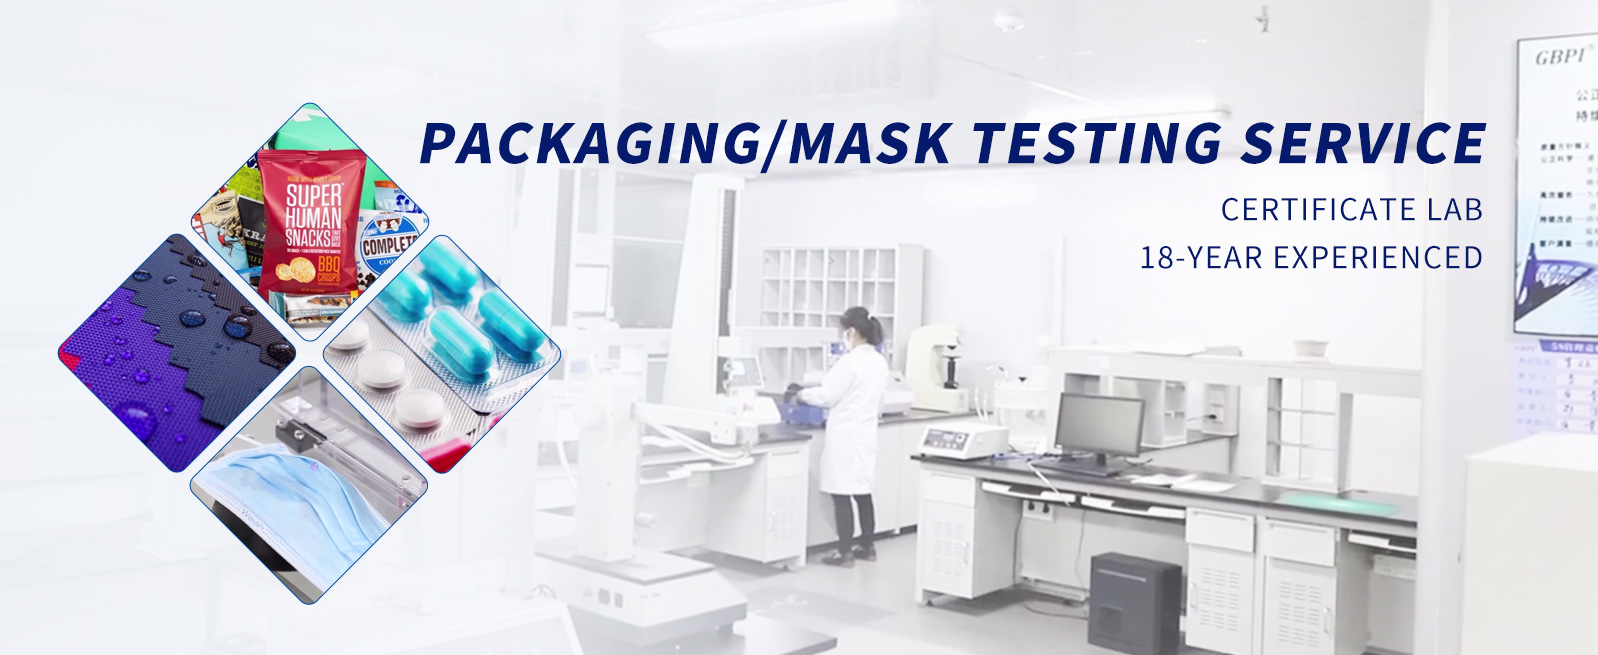 Packaging/Mask Testing Service